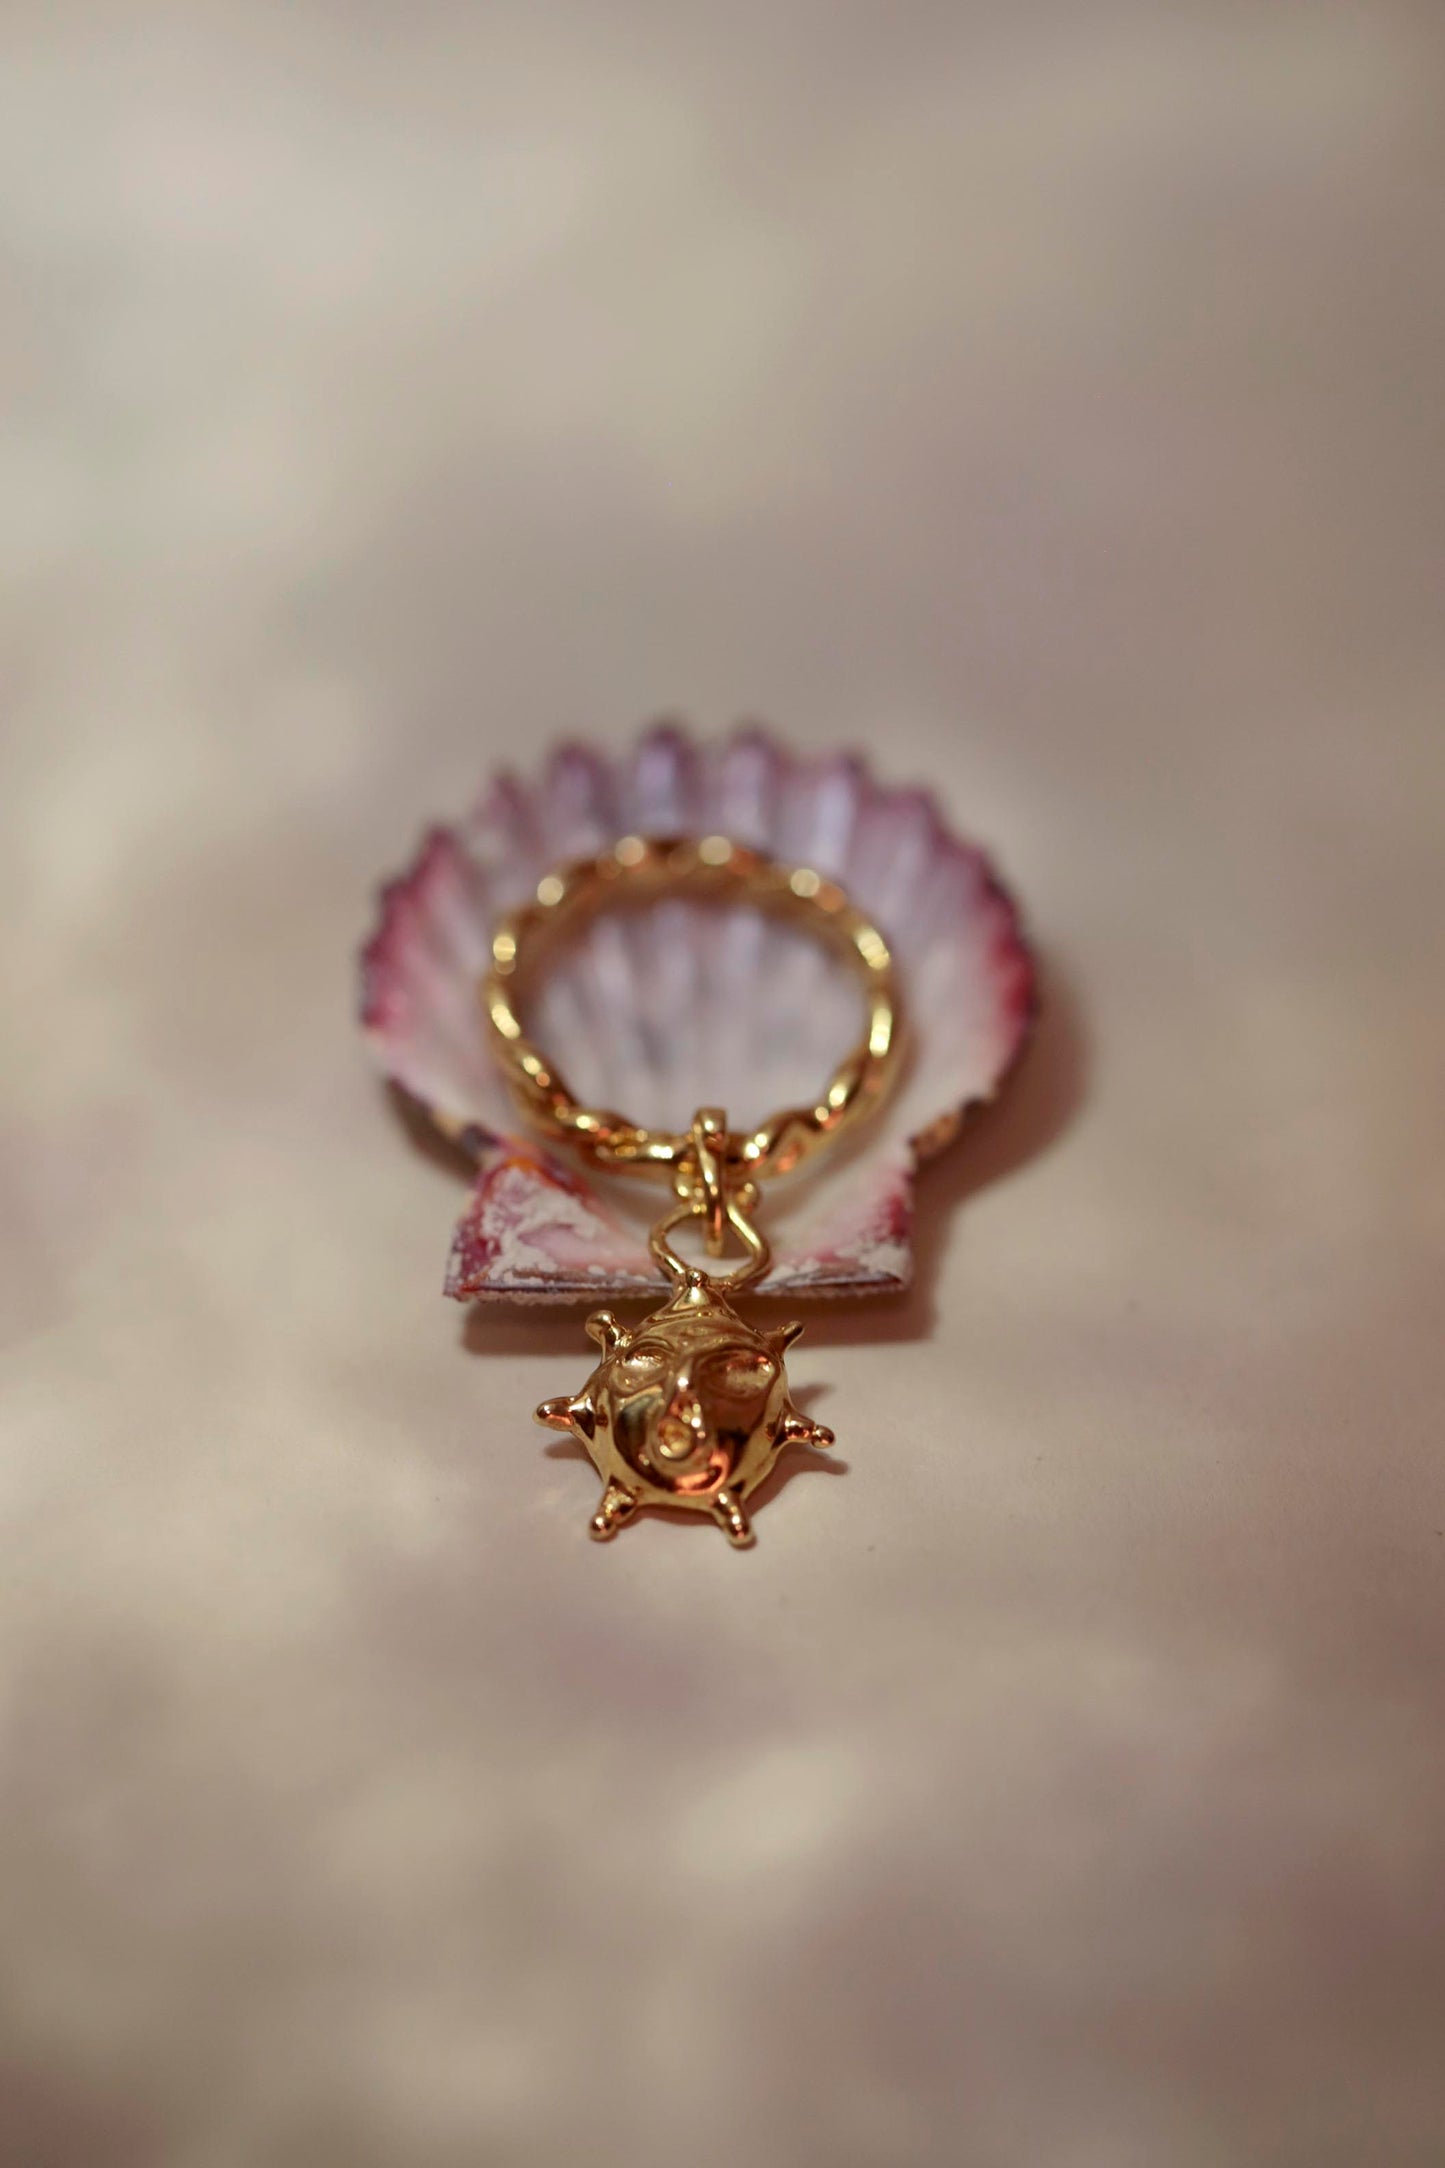 CLARK Aurora Charm ring rests inside a pink shell. The twisted 18K Gold Vermeil band is held in the seashell and the sun face charm lays on a dappled ground. This is a unique statement ring made using the lost wax casting method. A radiant gift for someone who likes renaissance inspired jewelry. 